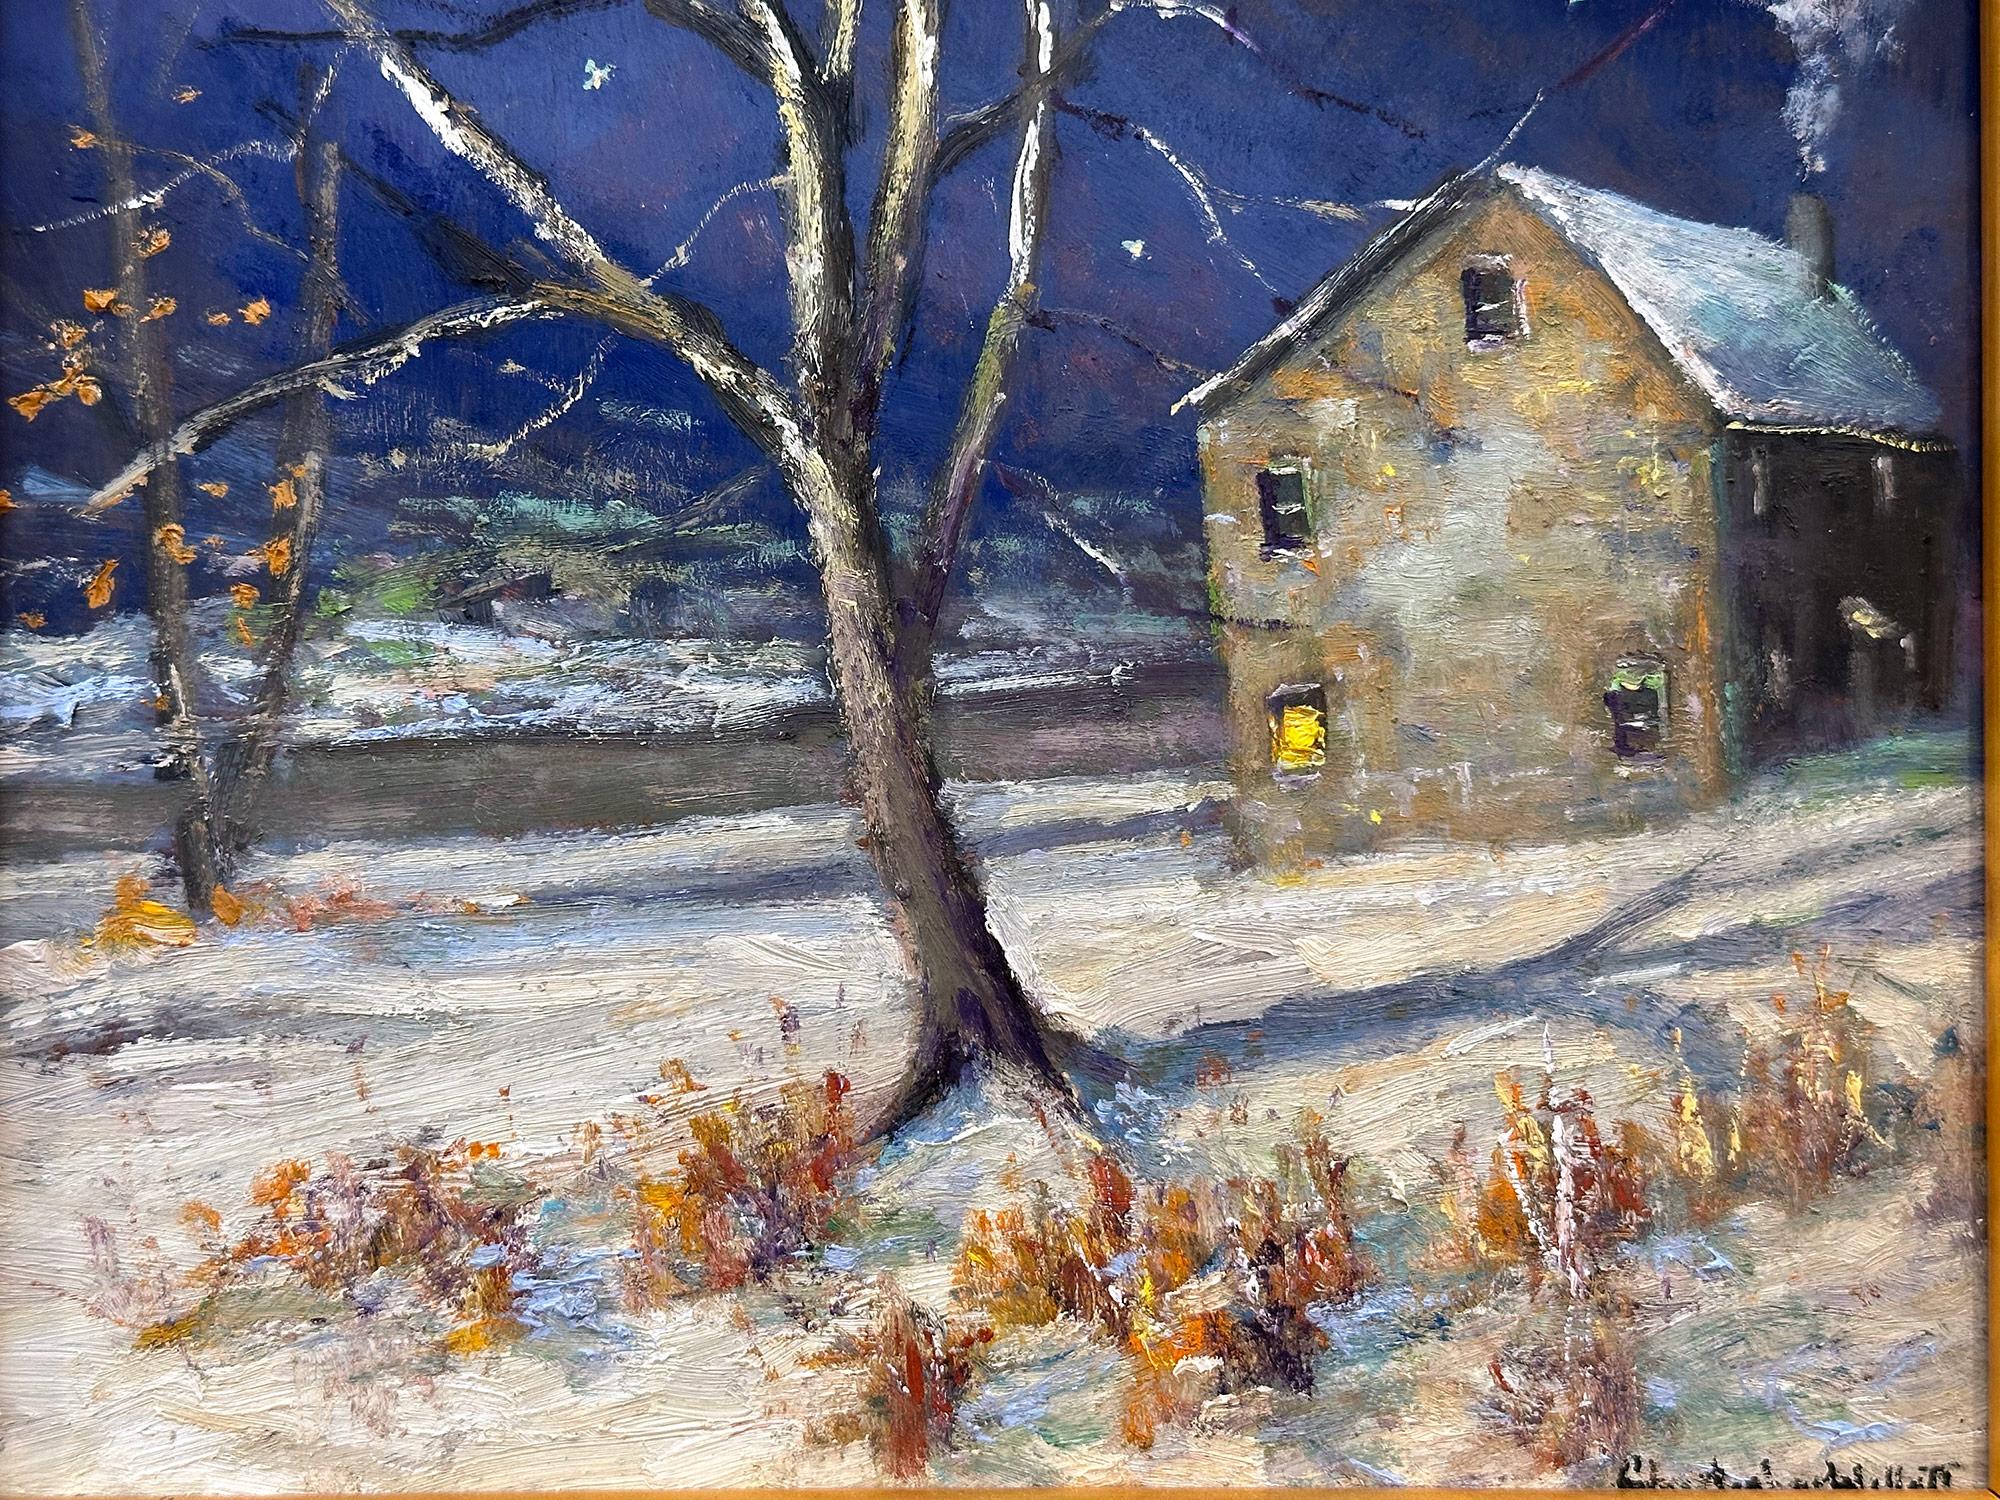 Impressionist winter pastoral scene of a quaint snow covered home in Tinicum, Bucks County, PA. Willett has portrayed this charming scene in a most intimate, yet energetic way, and has packed much feeling into this miniature work. It is almost as if